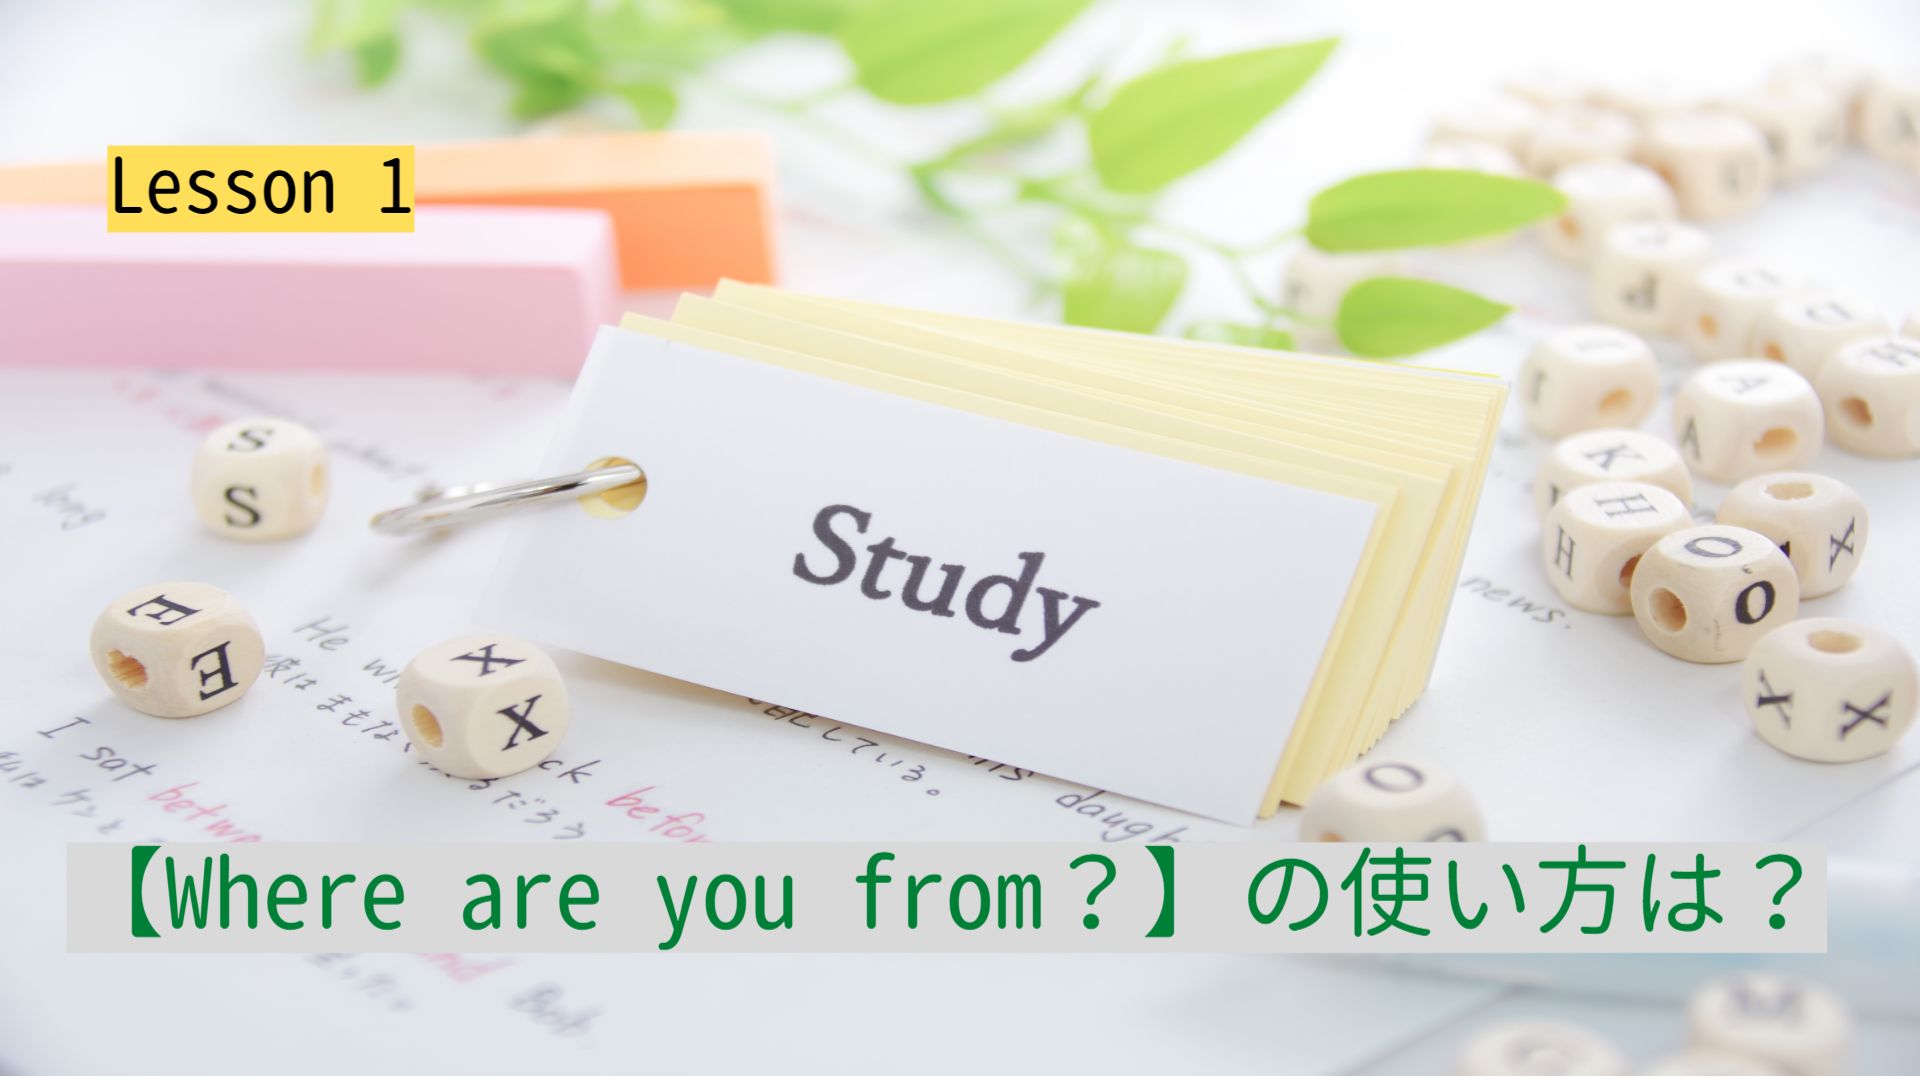 Where are you from?の返信は？